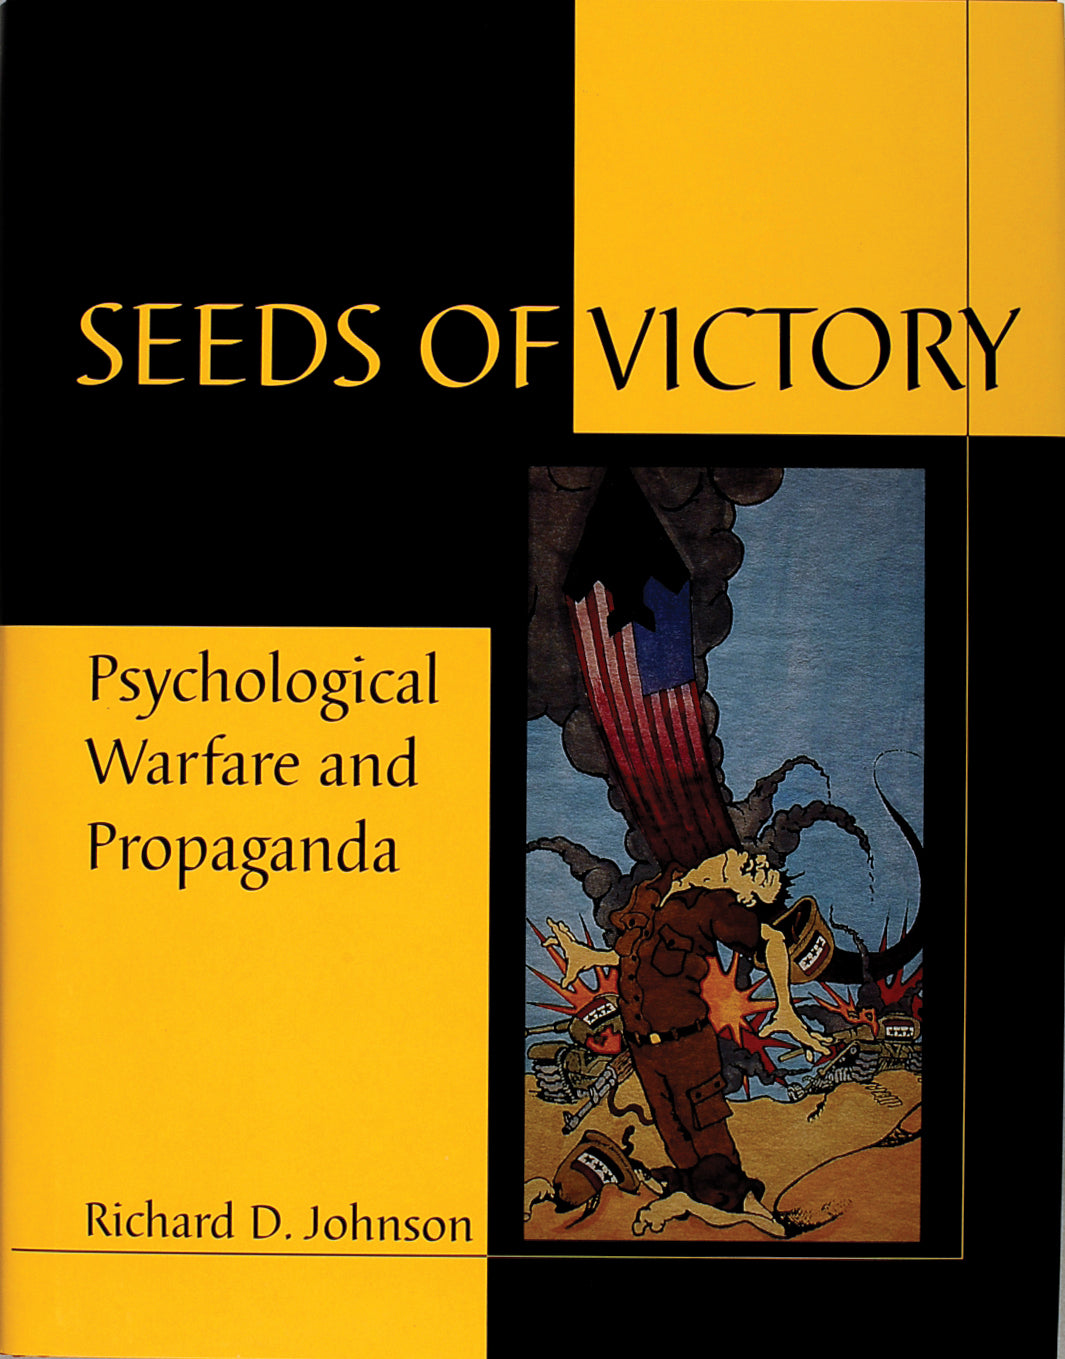 Seeds of Victory